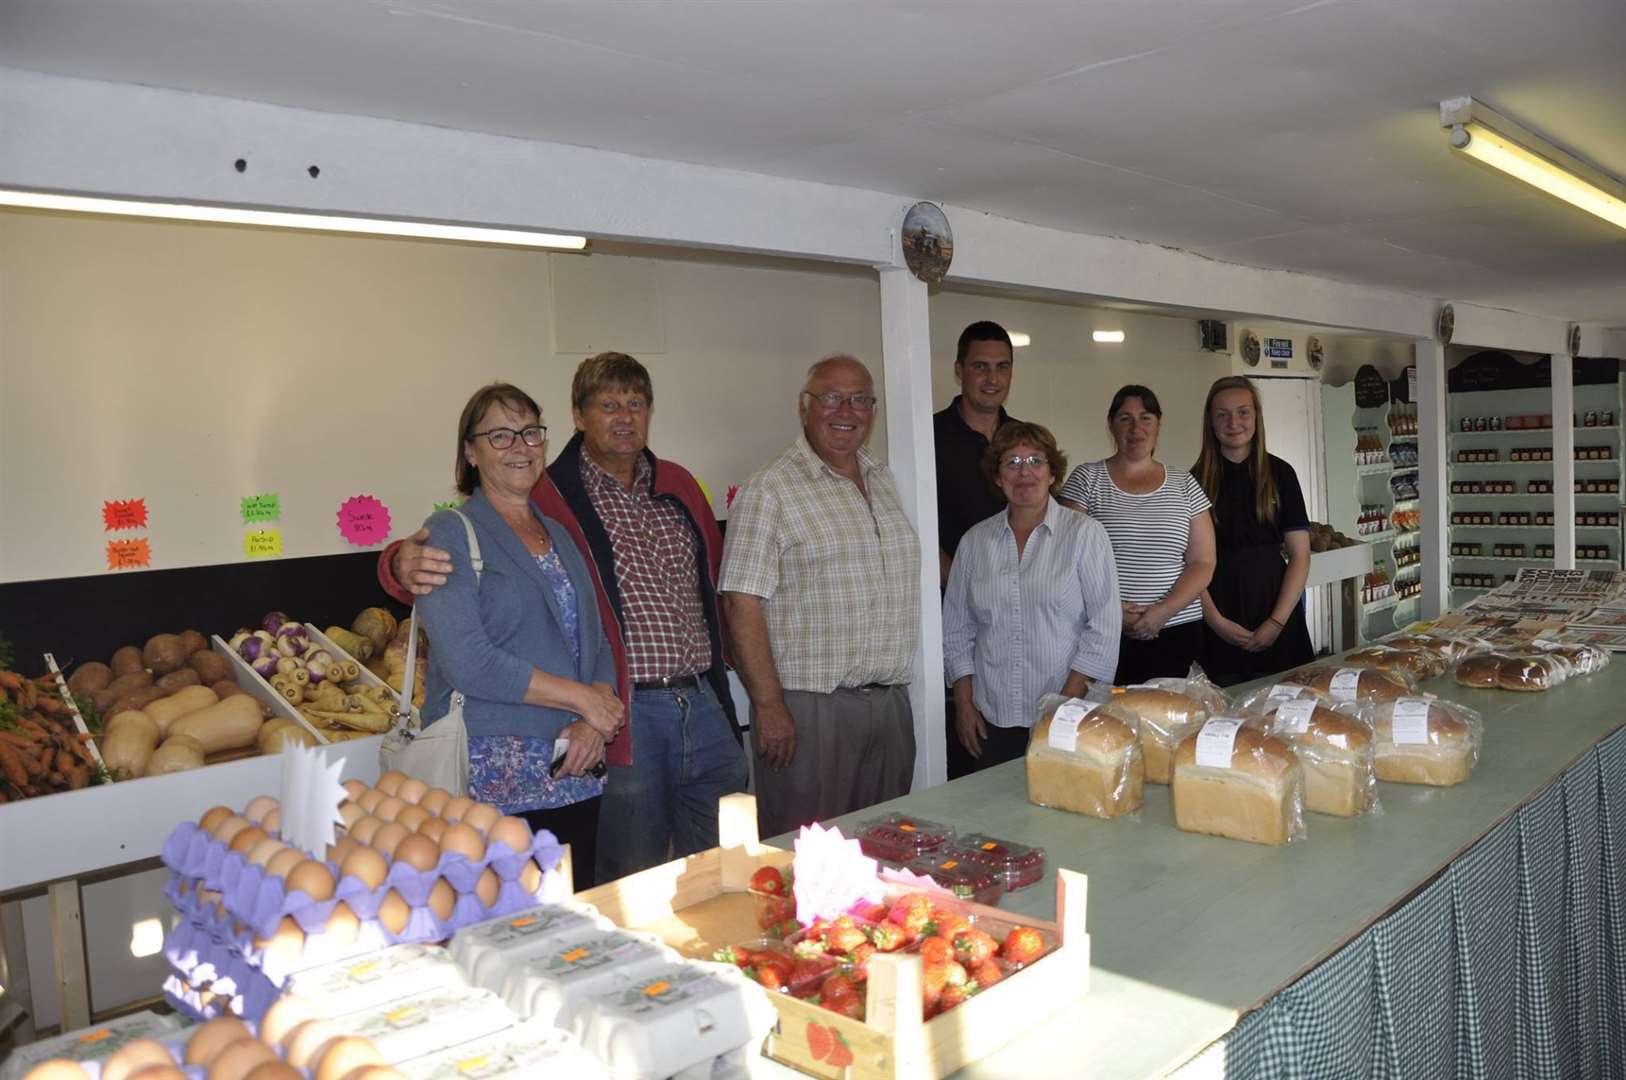 Delf Farm shop in Sandwich has re-opened under new management